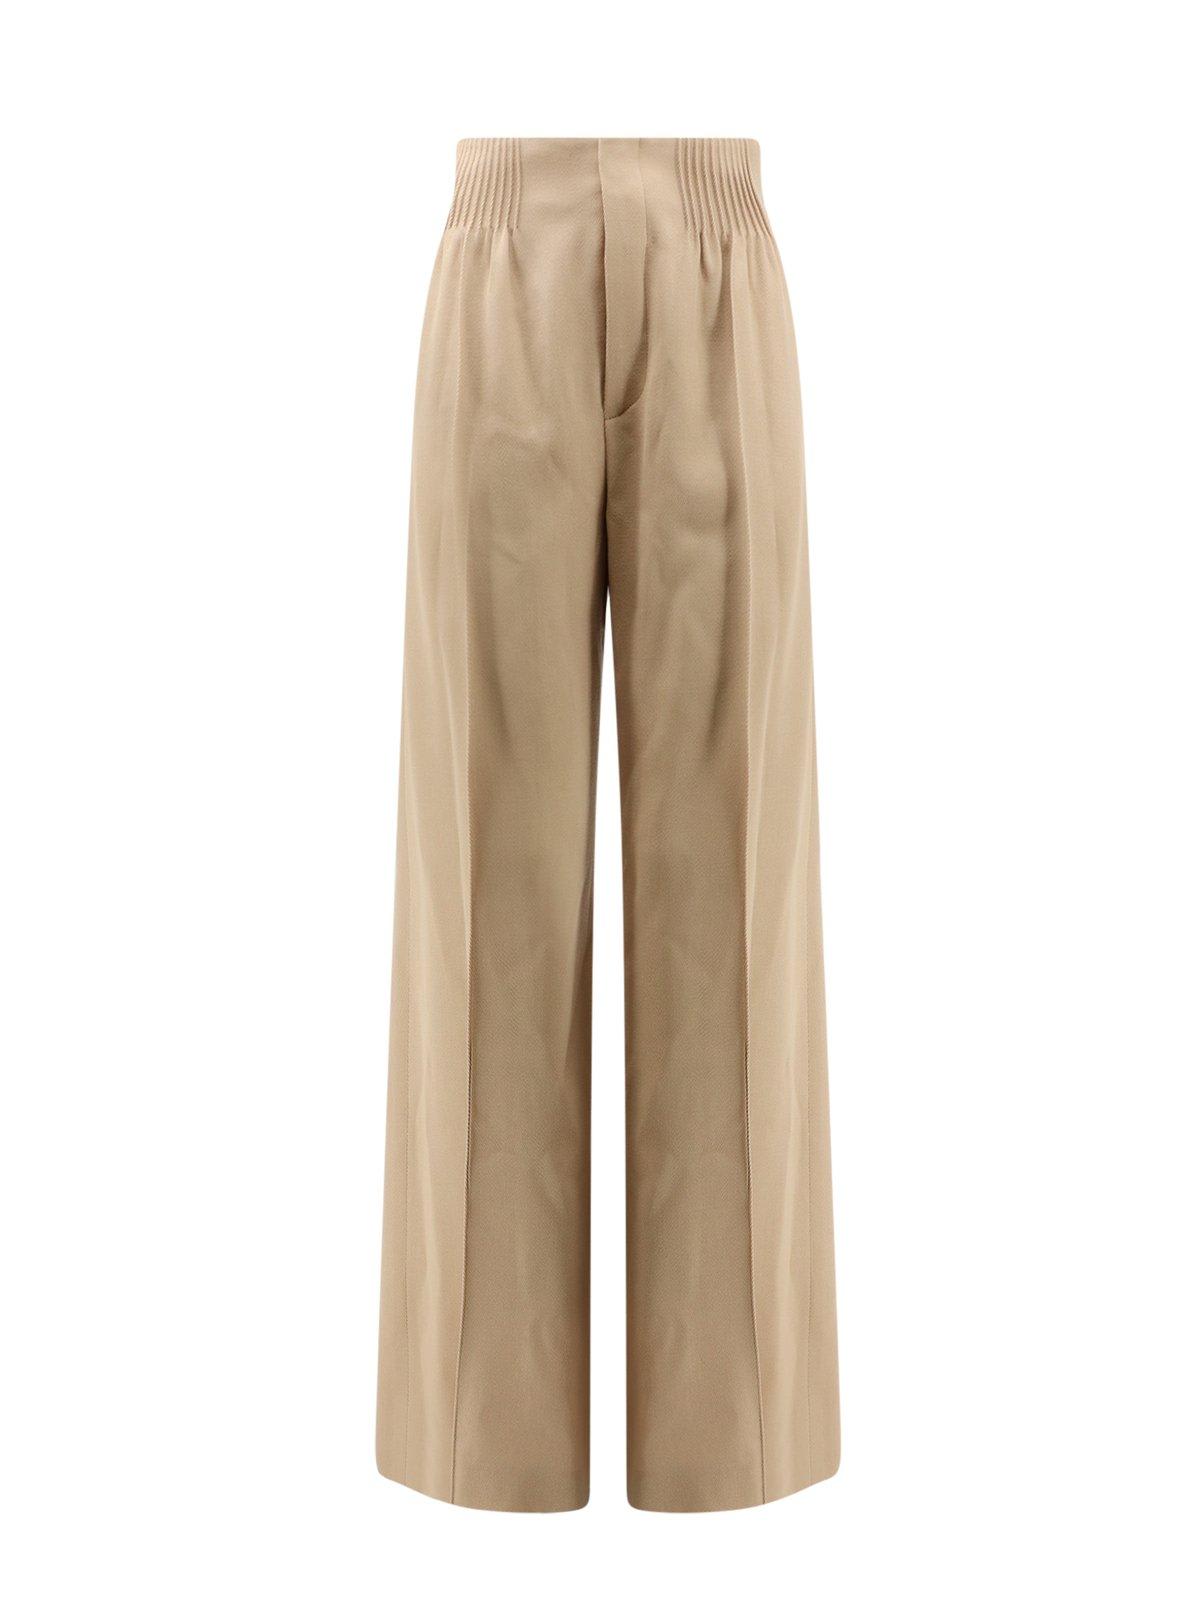 Chloé High-waisted Tailored Trousers